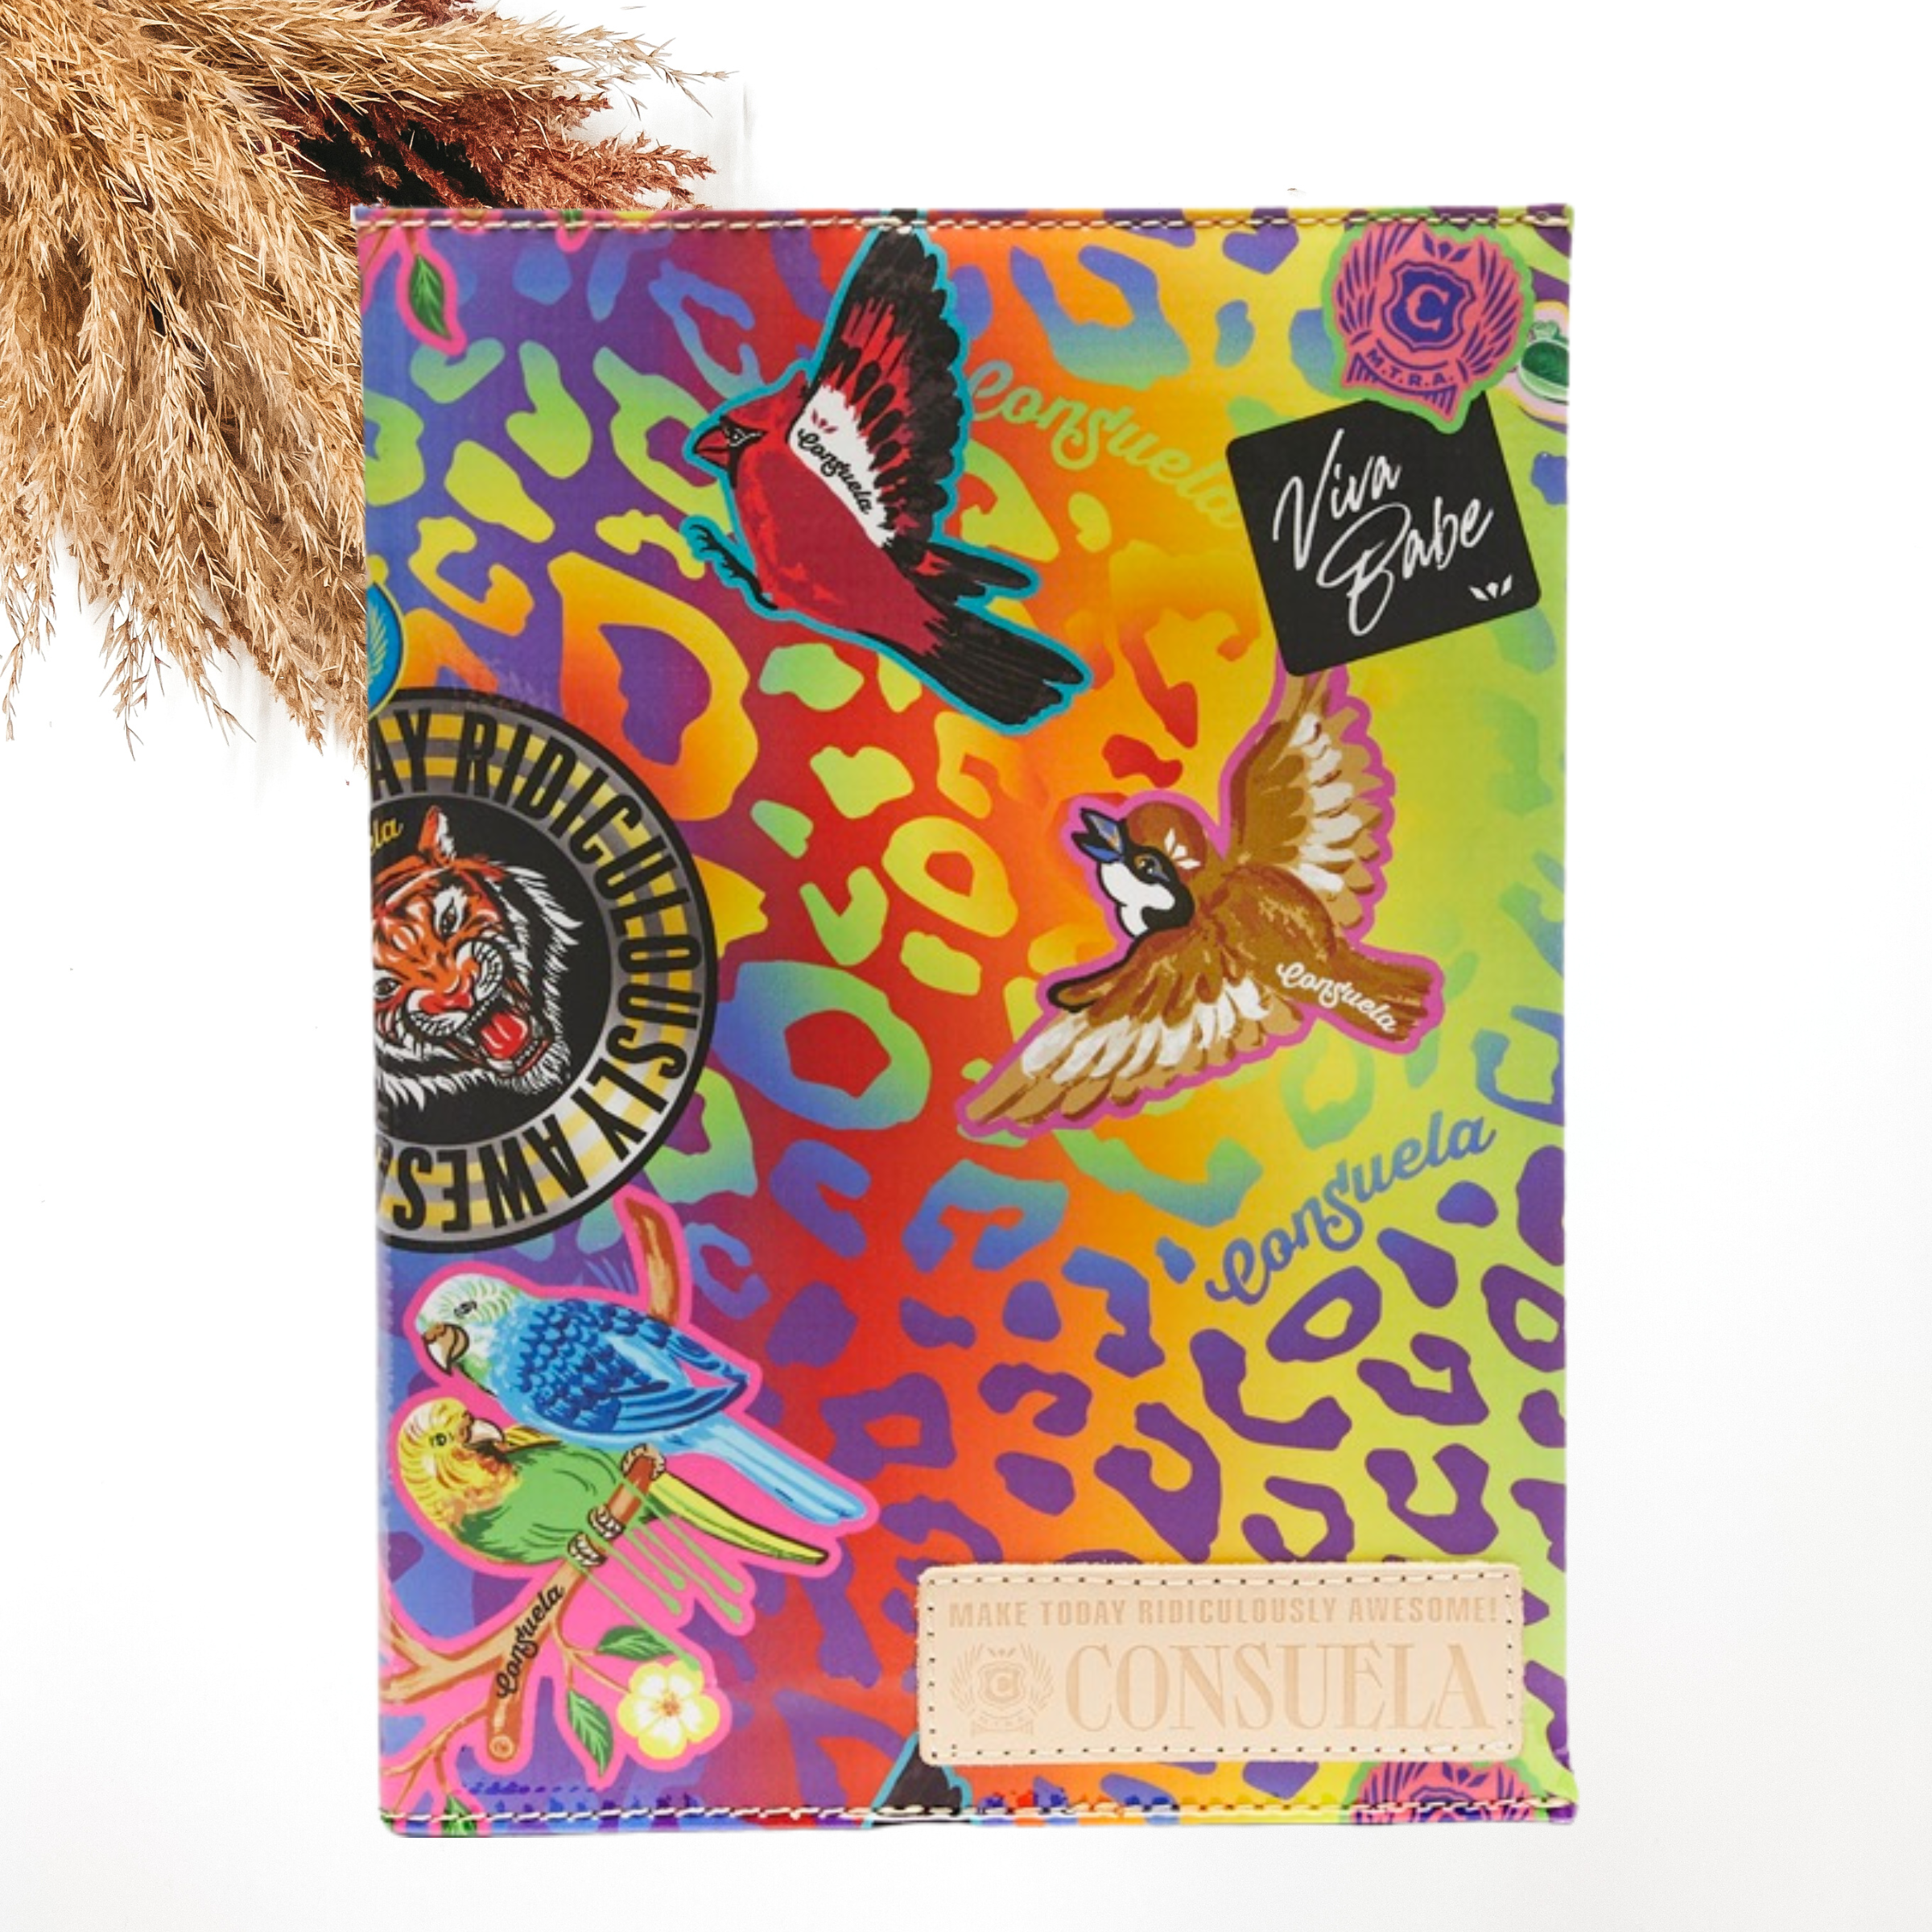 Pictured is a notebook cover with a mostly a multicolored leopard print design. It also includes random sticker patches design and a light tan Consuela patch on the bottom right corner. This notebook is pictured on a white background with pompous grass in the top left corner of the picture.